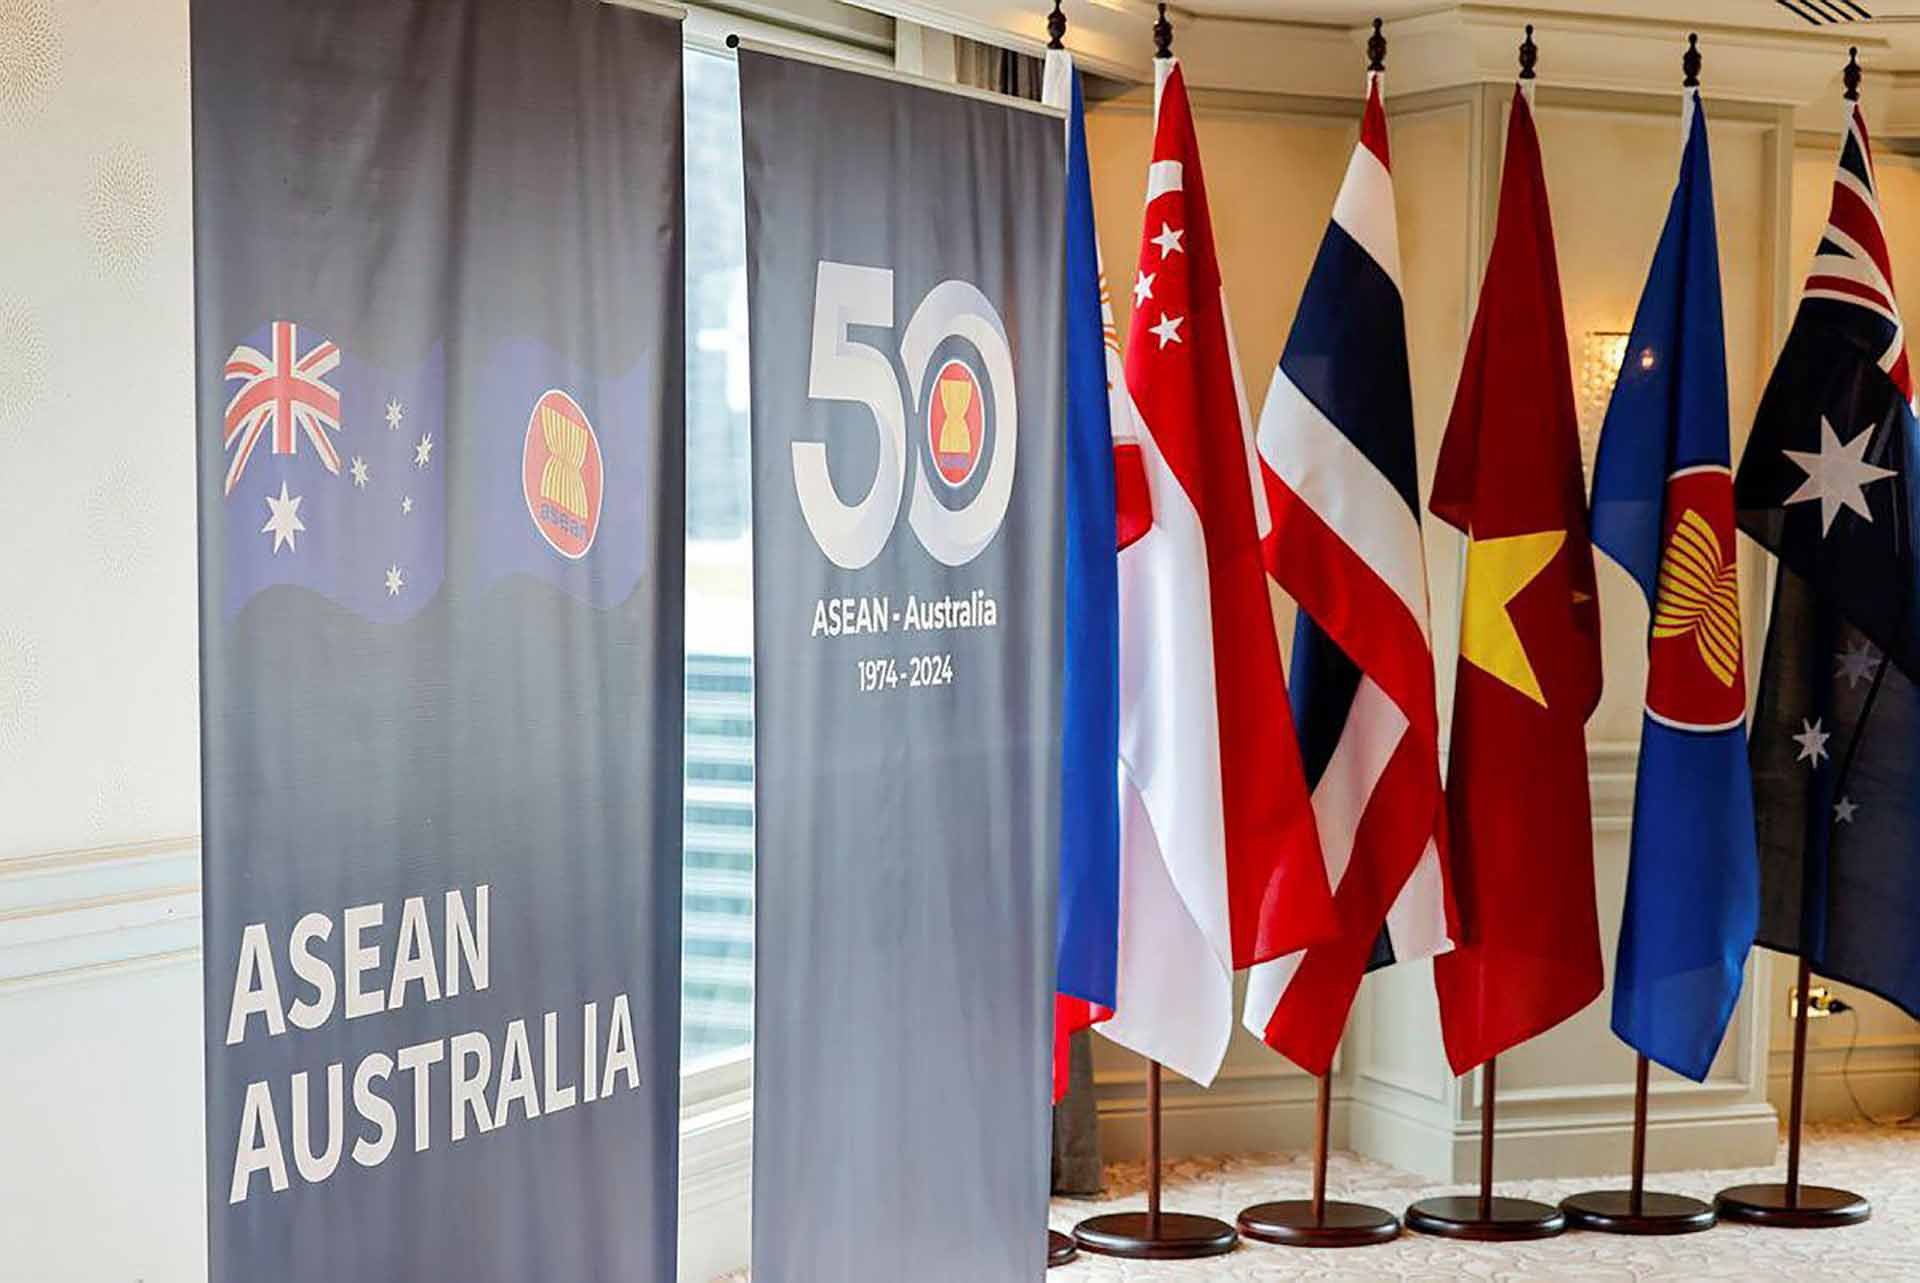 ASEAN is coming to Australia!